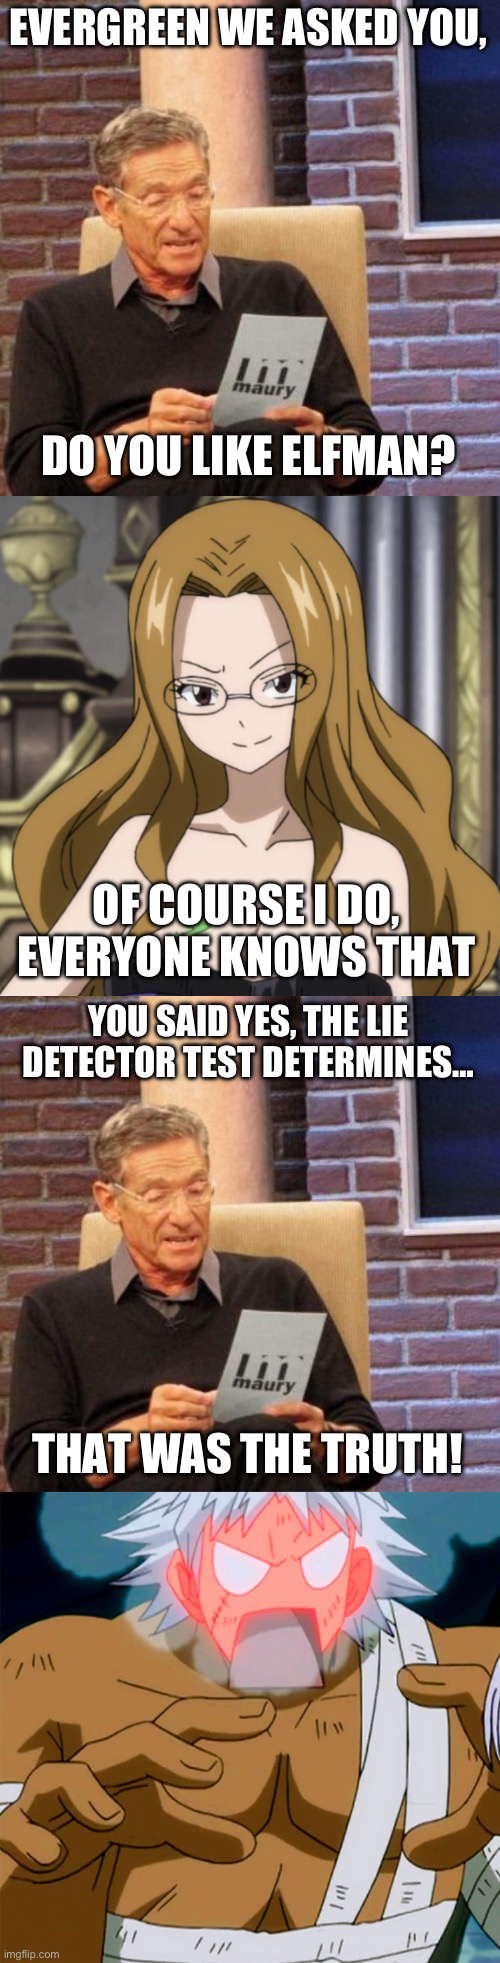 Maury Lie Detector Part 4, Does Evergreen like Elfman? | EVERGREEN WE ASKED YOU, DO YOU LIKE ELFMAN? OF COURSE I DO, EVERYONE KNOWS THAT; YOU SAID YES, THE LIE DETECTOR TEST DETERMINES…; THAT WAS THE TRUTH! | image tagged in memes,maury lie detector,evergreen,elfman,fairy tail,elfgreen | made w/ Imgflip meme maker